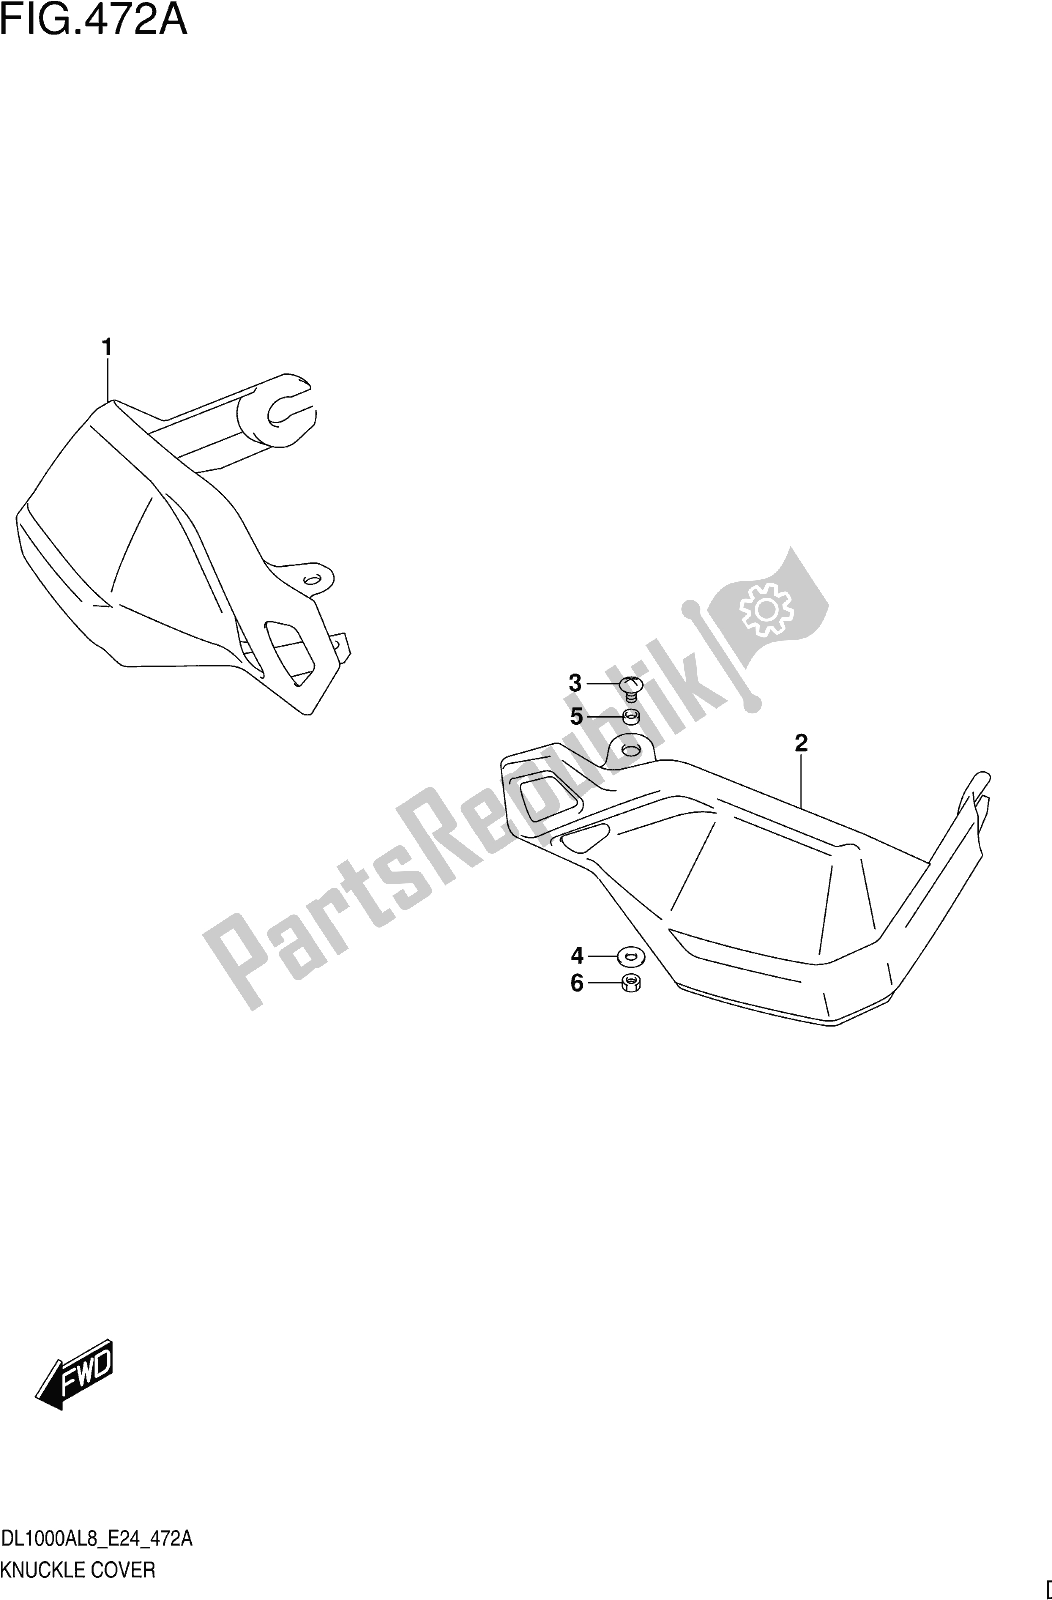 All parts for the Fig. 472a Knuckle Cover of the Suzuki DL 1000 XA 2018